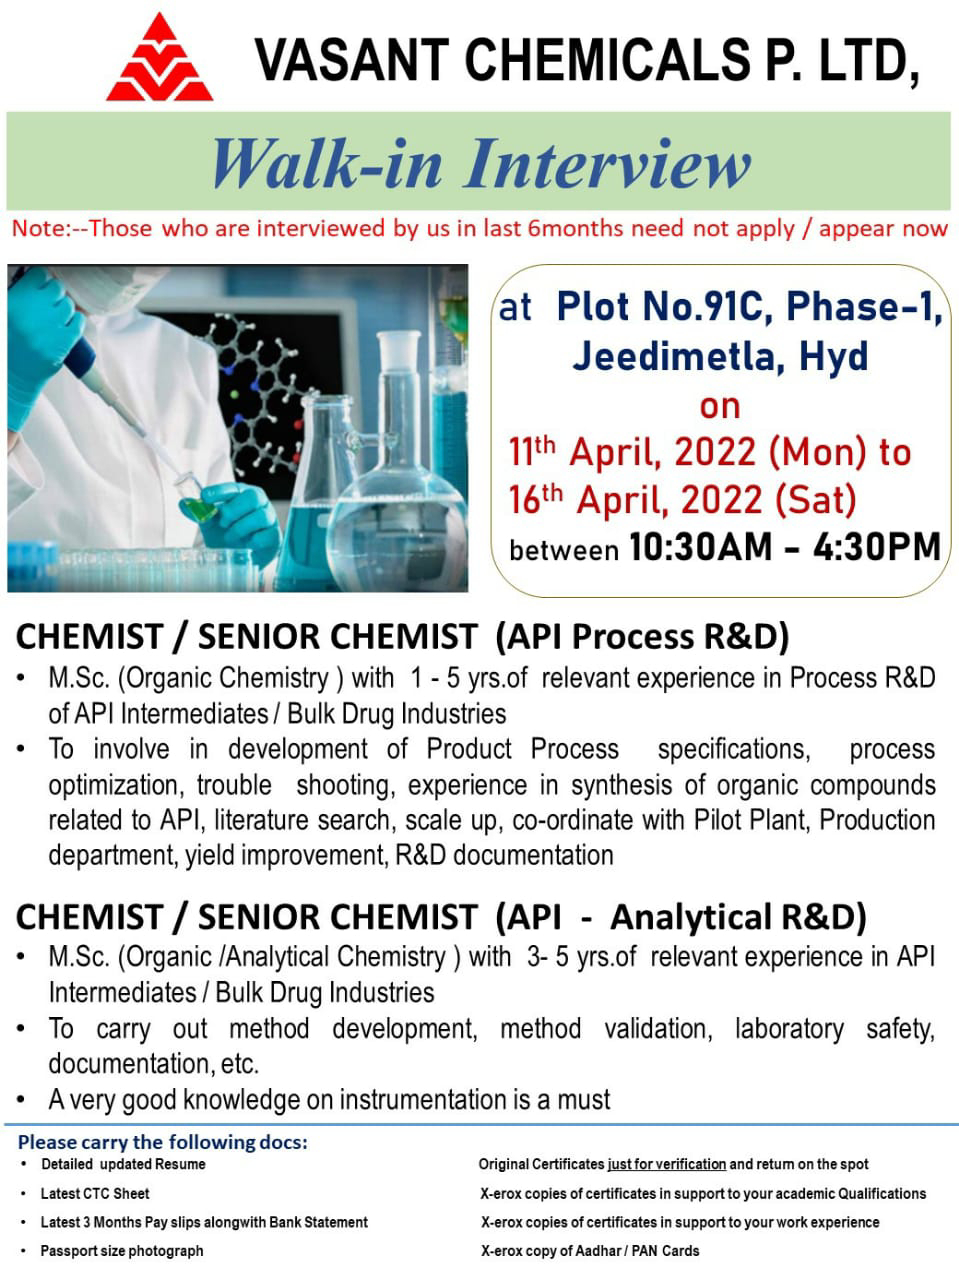 Job Availables,Vasant Chemicals Pvt Ltd Walk-In-Interview For MSc Organic Chemistry/ Analytical Chemistry